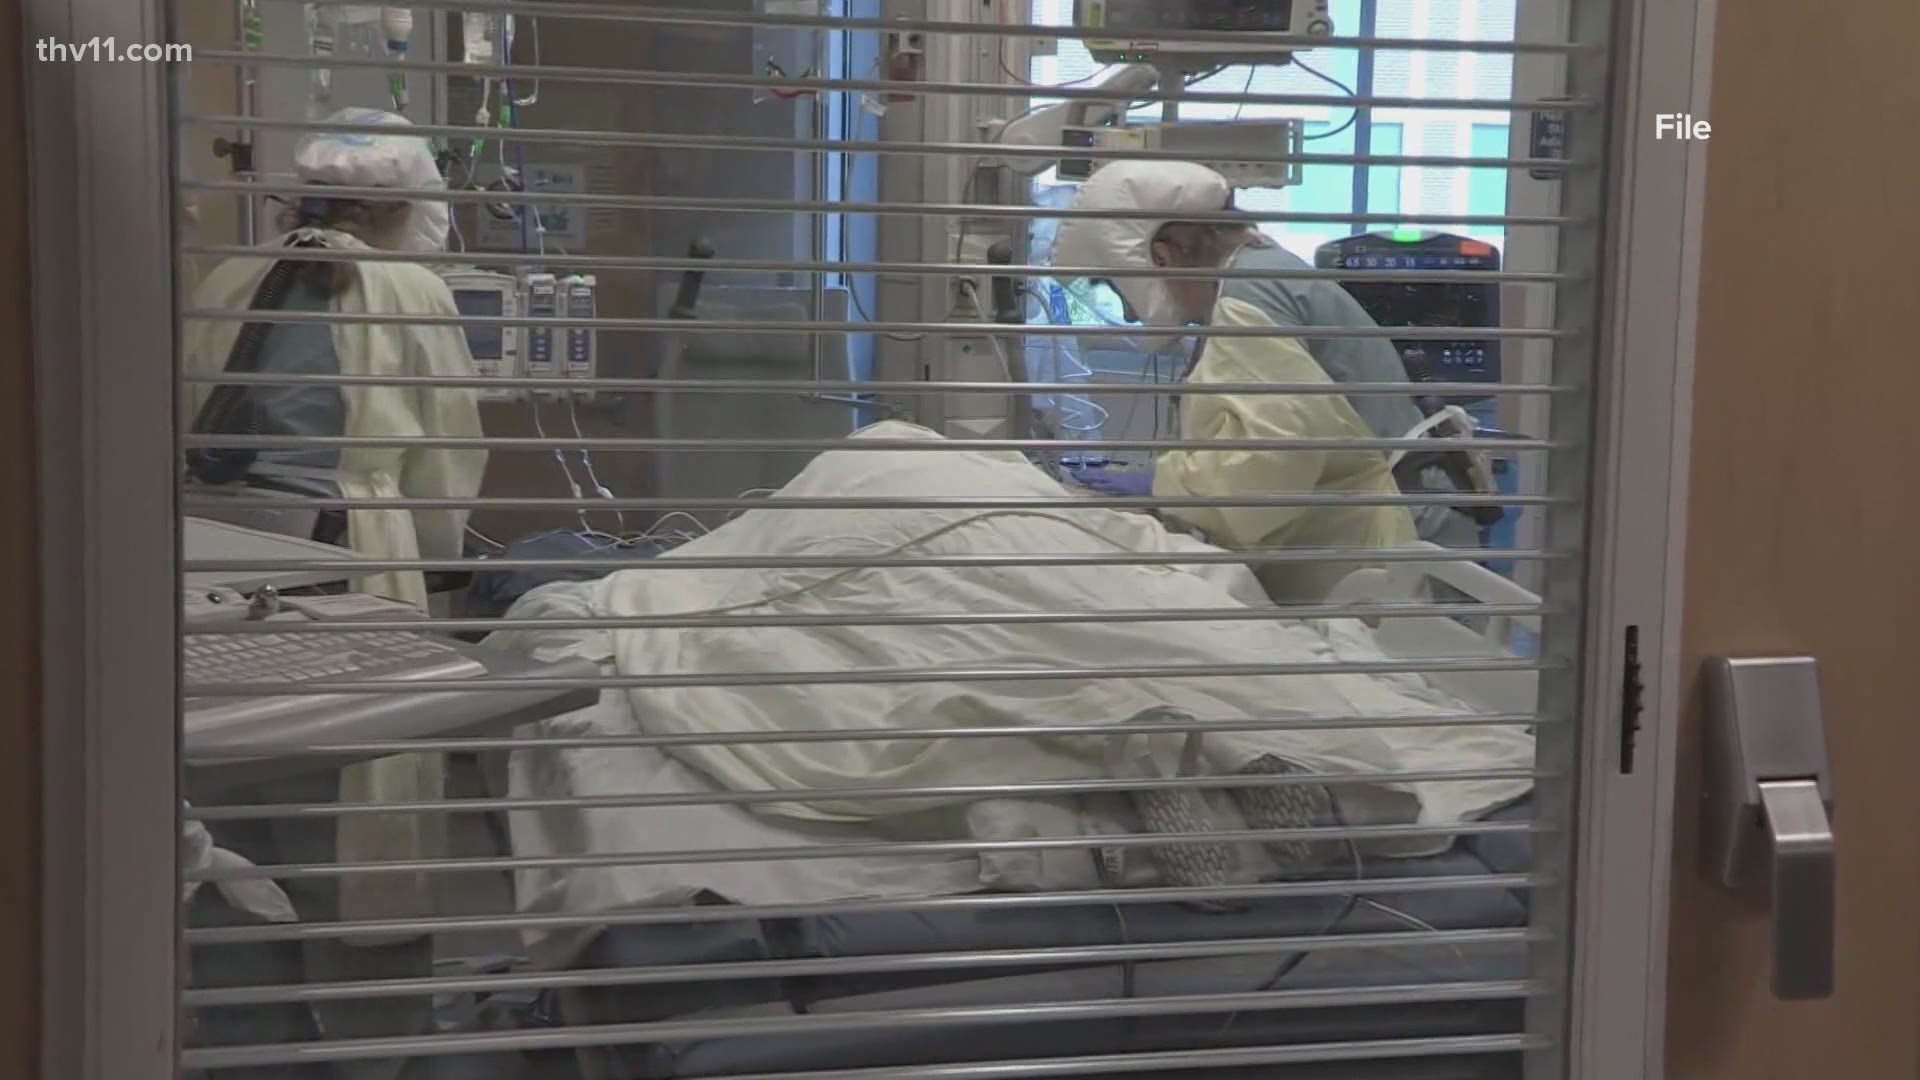 After being shut down for 3 months, UAMS officially reopened its designated COVID-19 unit.